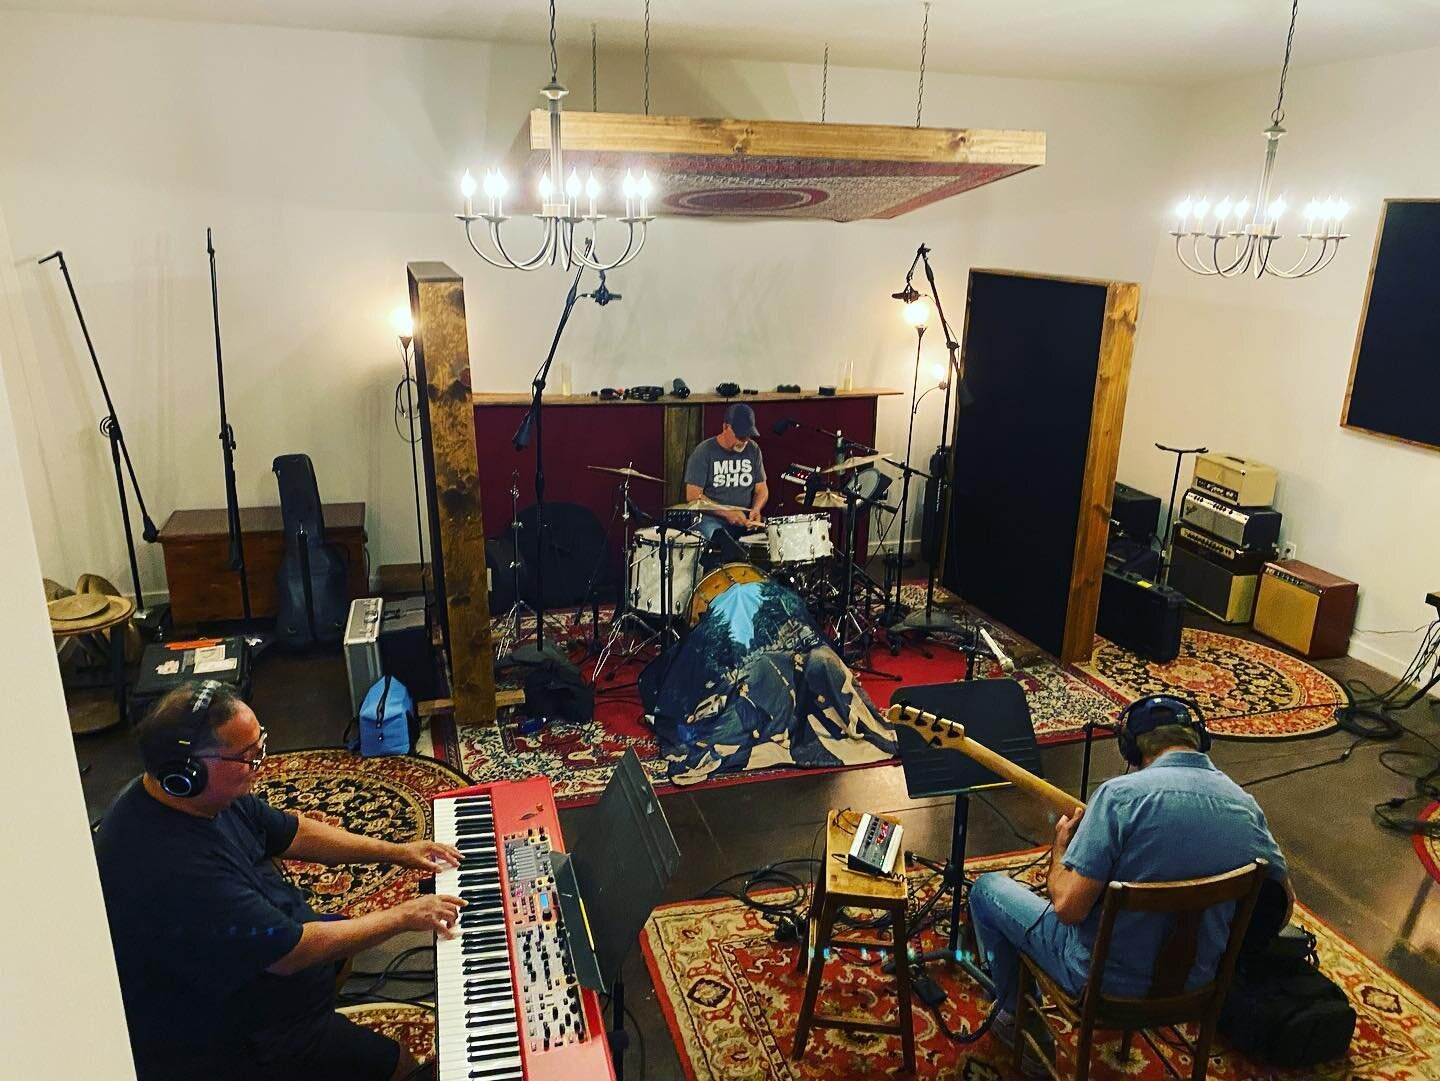 Incredible day in the studio with some incredibly nice guys with some incredible talent. #incredible 🙏❤️😬 @rmcnelley @lynnwi11iams @zachallenaudio Mike Rojas, Pat McGrath, and Jimmy Carter #recordingstudio #studiosessions #nashville #talentedmusici